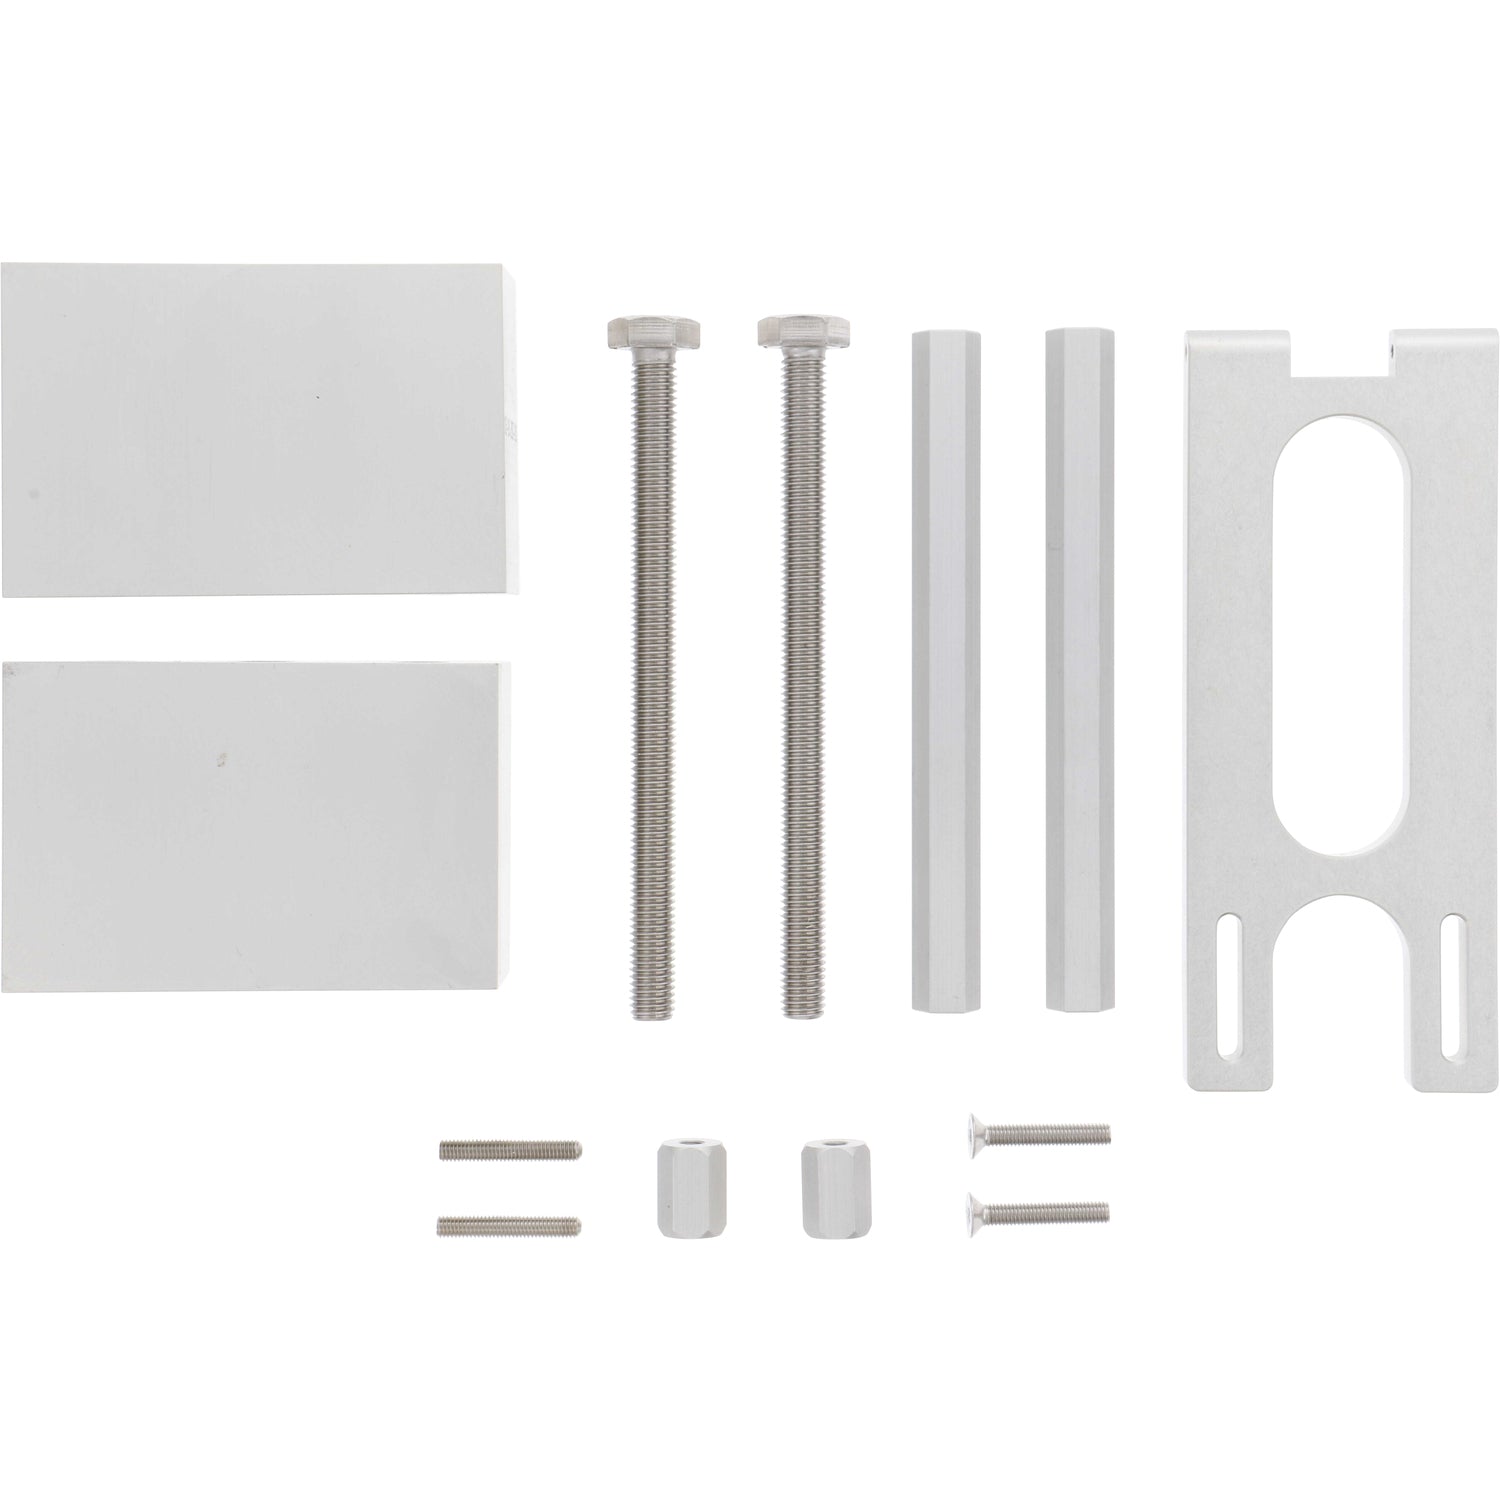 An assortment of small parts that include two hard anodized aluminum seamer blocks, four anodized aluminum threaded hexagonal standoffs, six stainless steel fasteners and one hard anodized aluminum sensor mounting bracket. All parts are shown on a white background